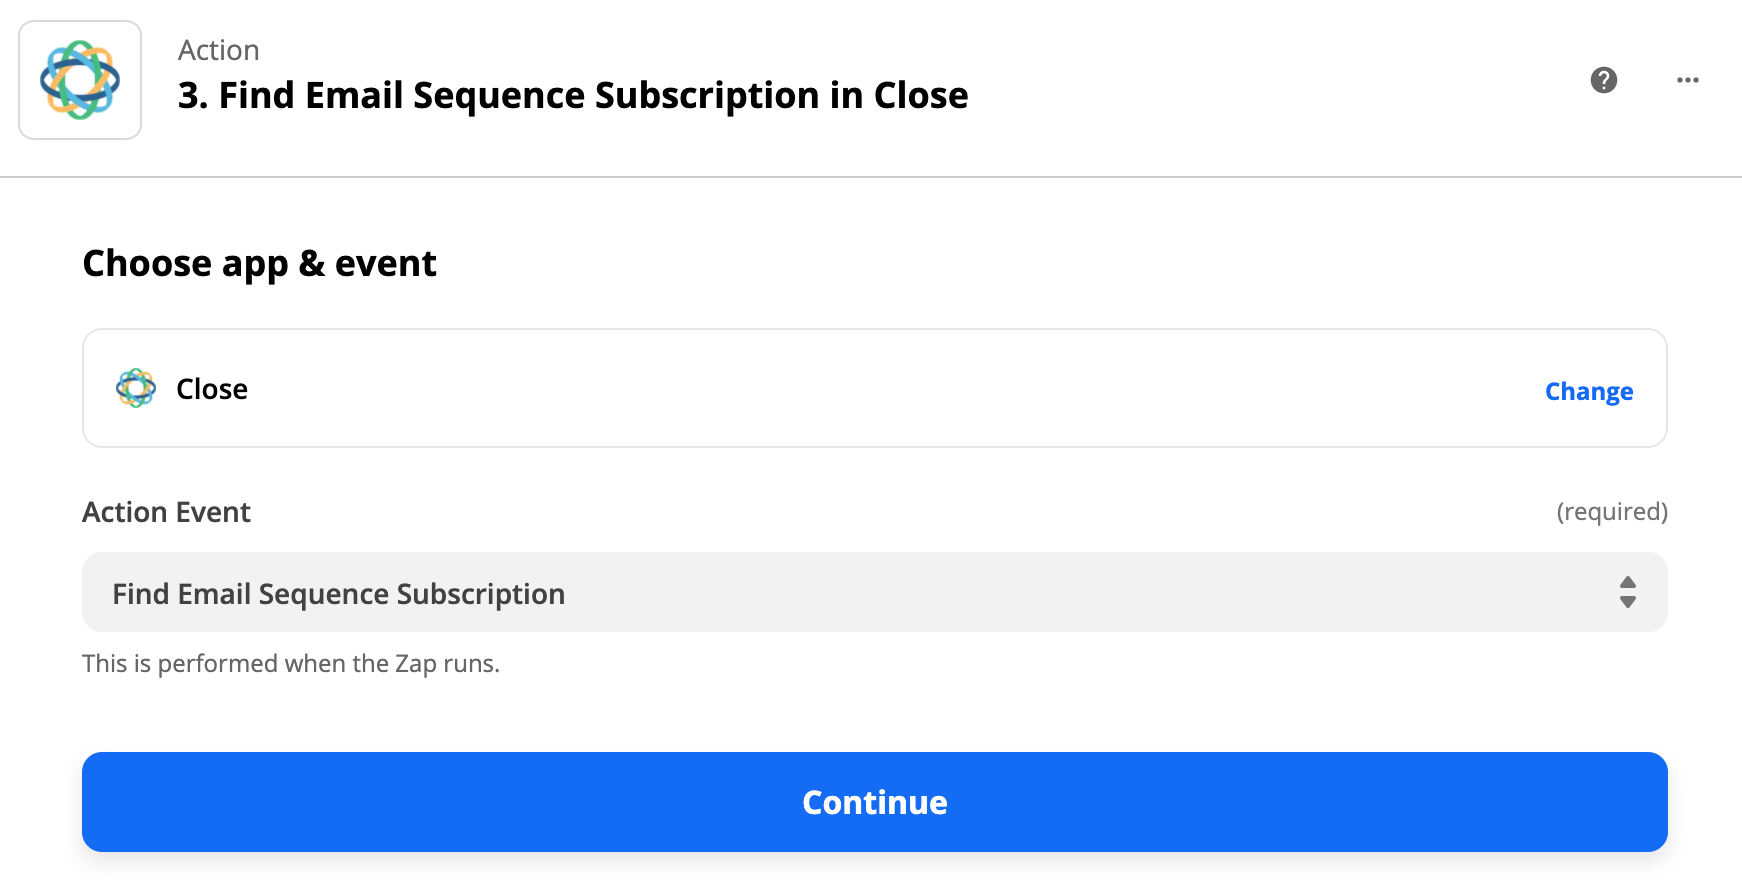 Find Email Sequence Subscription search step in Zapier